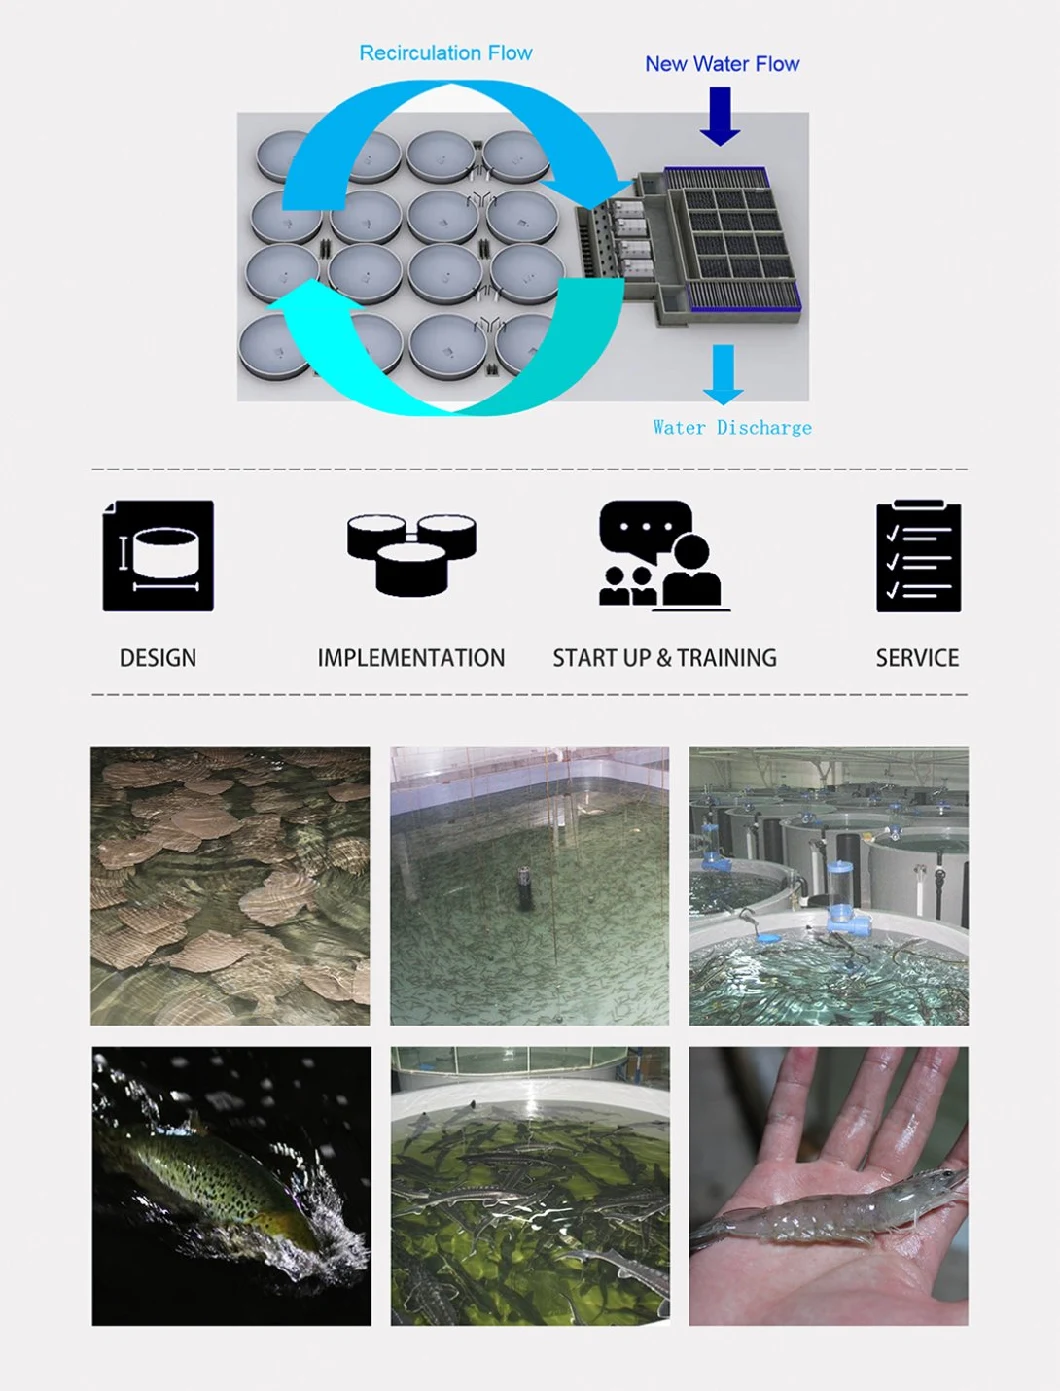 Kingto Automatic Drum Filter for Aquaculture Water &amp; Landscape Pond Water Filtration